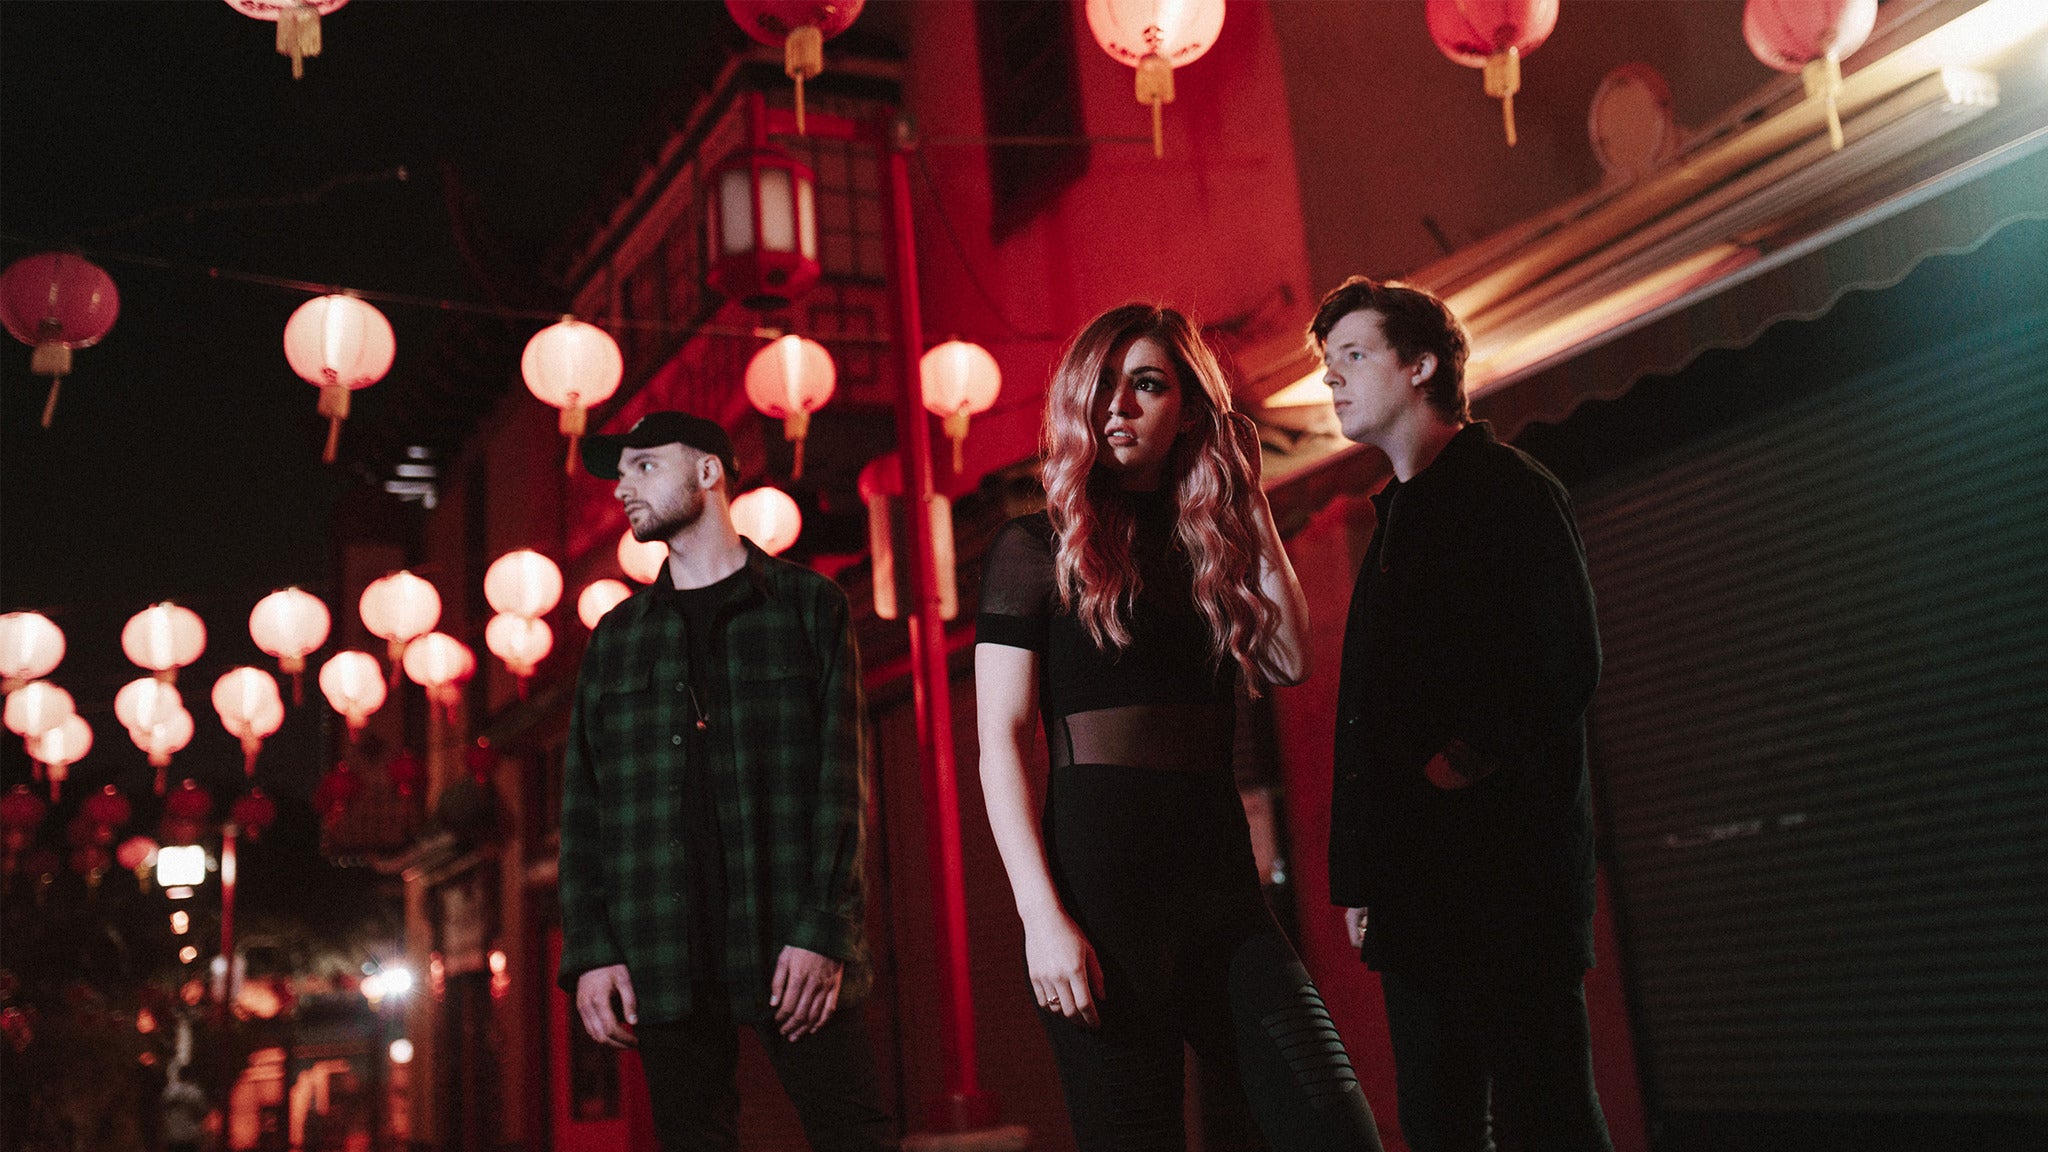 AGAINST THE CURRENT - Past Lives World Tour 2019 in New York promo photo for Citi® Cardmember Preferred presale offer code